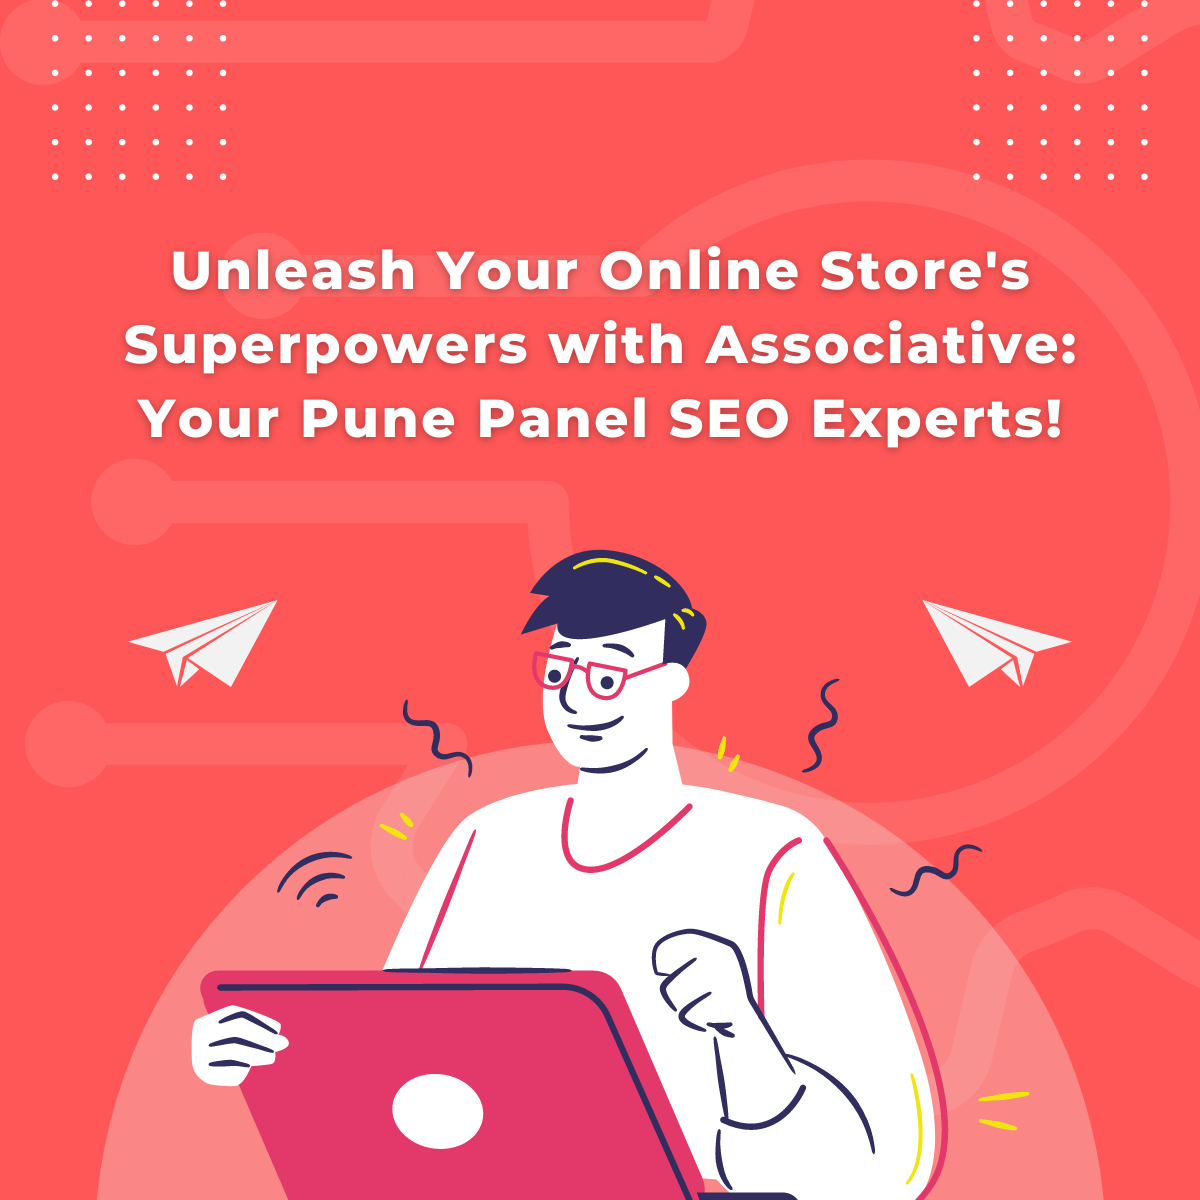 Unleash Your Online Store's Superpowers: Your Pune Panel SEO Experts!